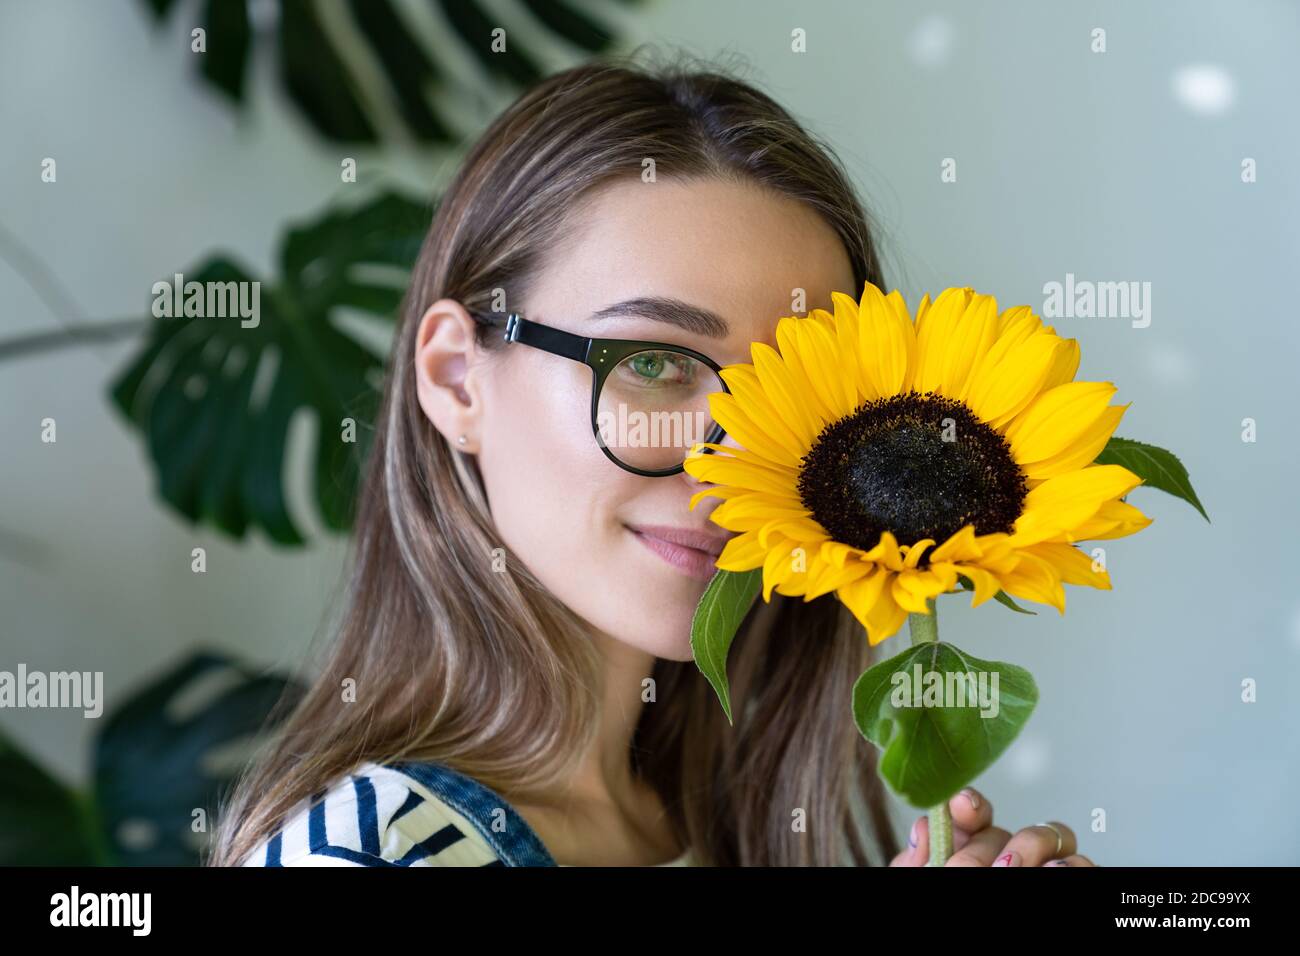 Florist woman in glasses holding and hiding behind a sunflower, looking at camera. Stock Photo